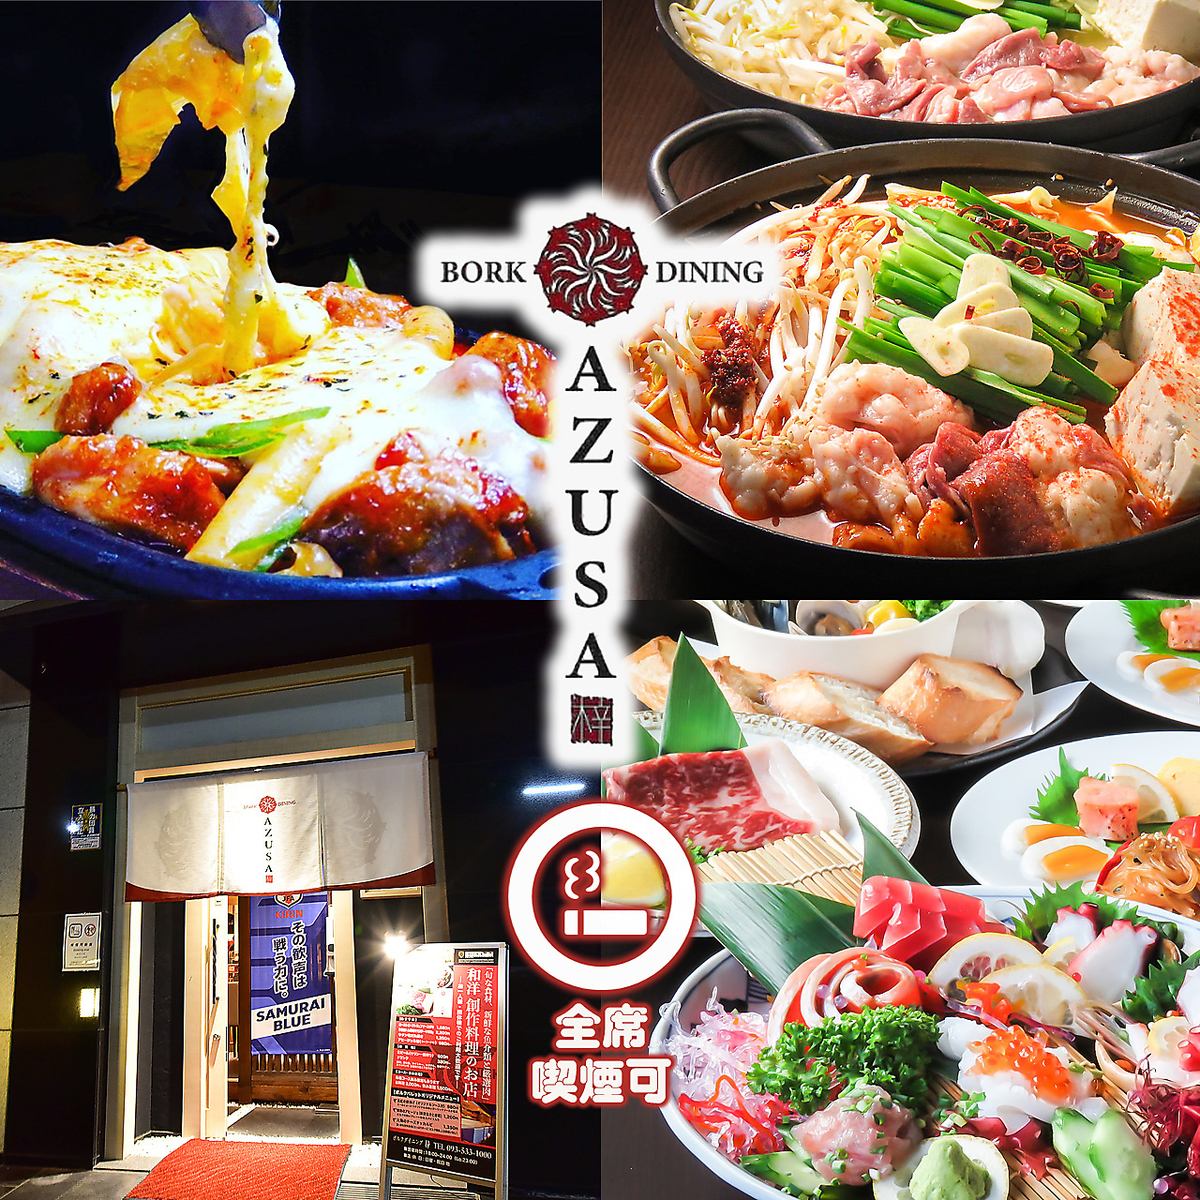 A restaurant serving Japanese and Western creative cuisine where you can enjoy seasonal fresh fish, hotpot, Wagyu steak, and local gourmet food made by athletes.